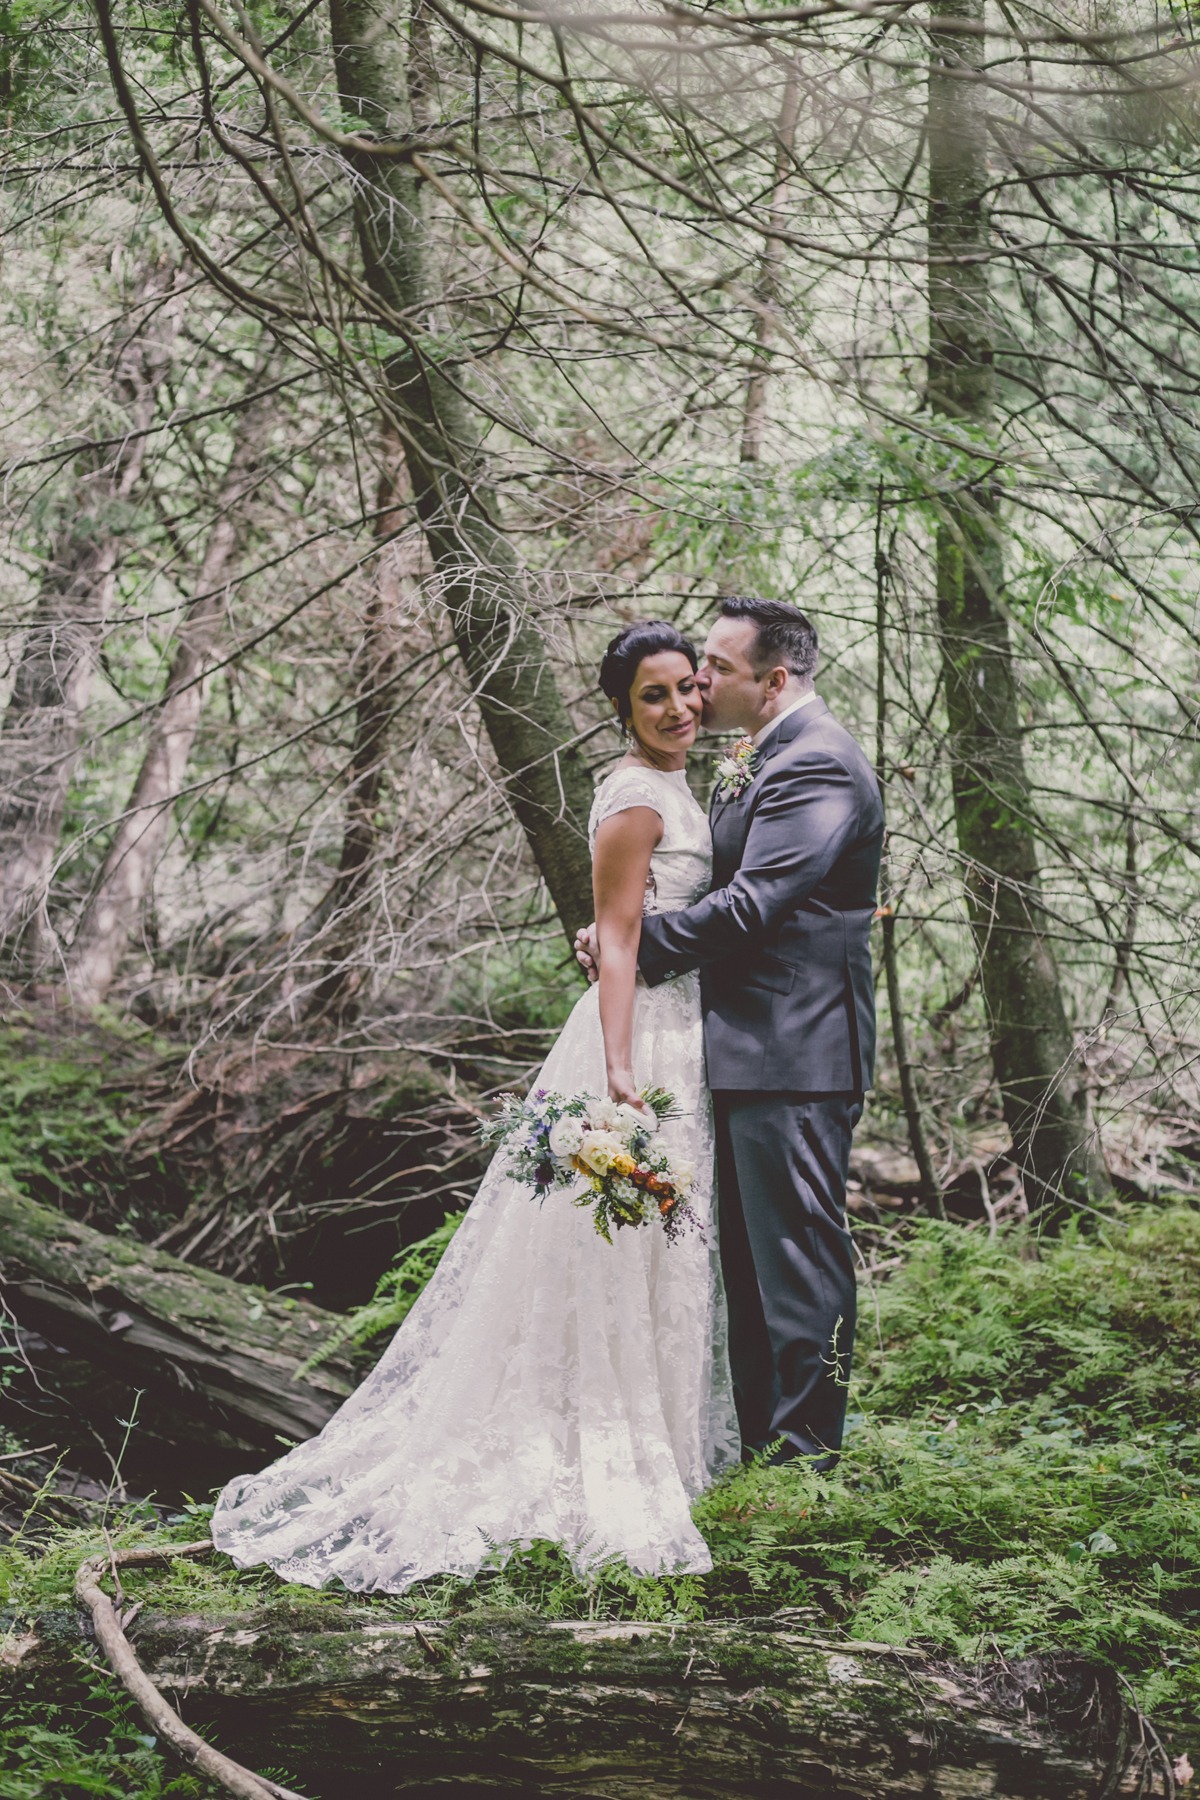 sweet wedding couple photos in the forest